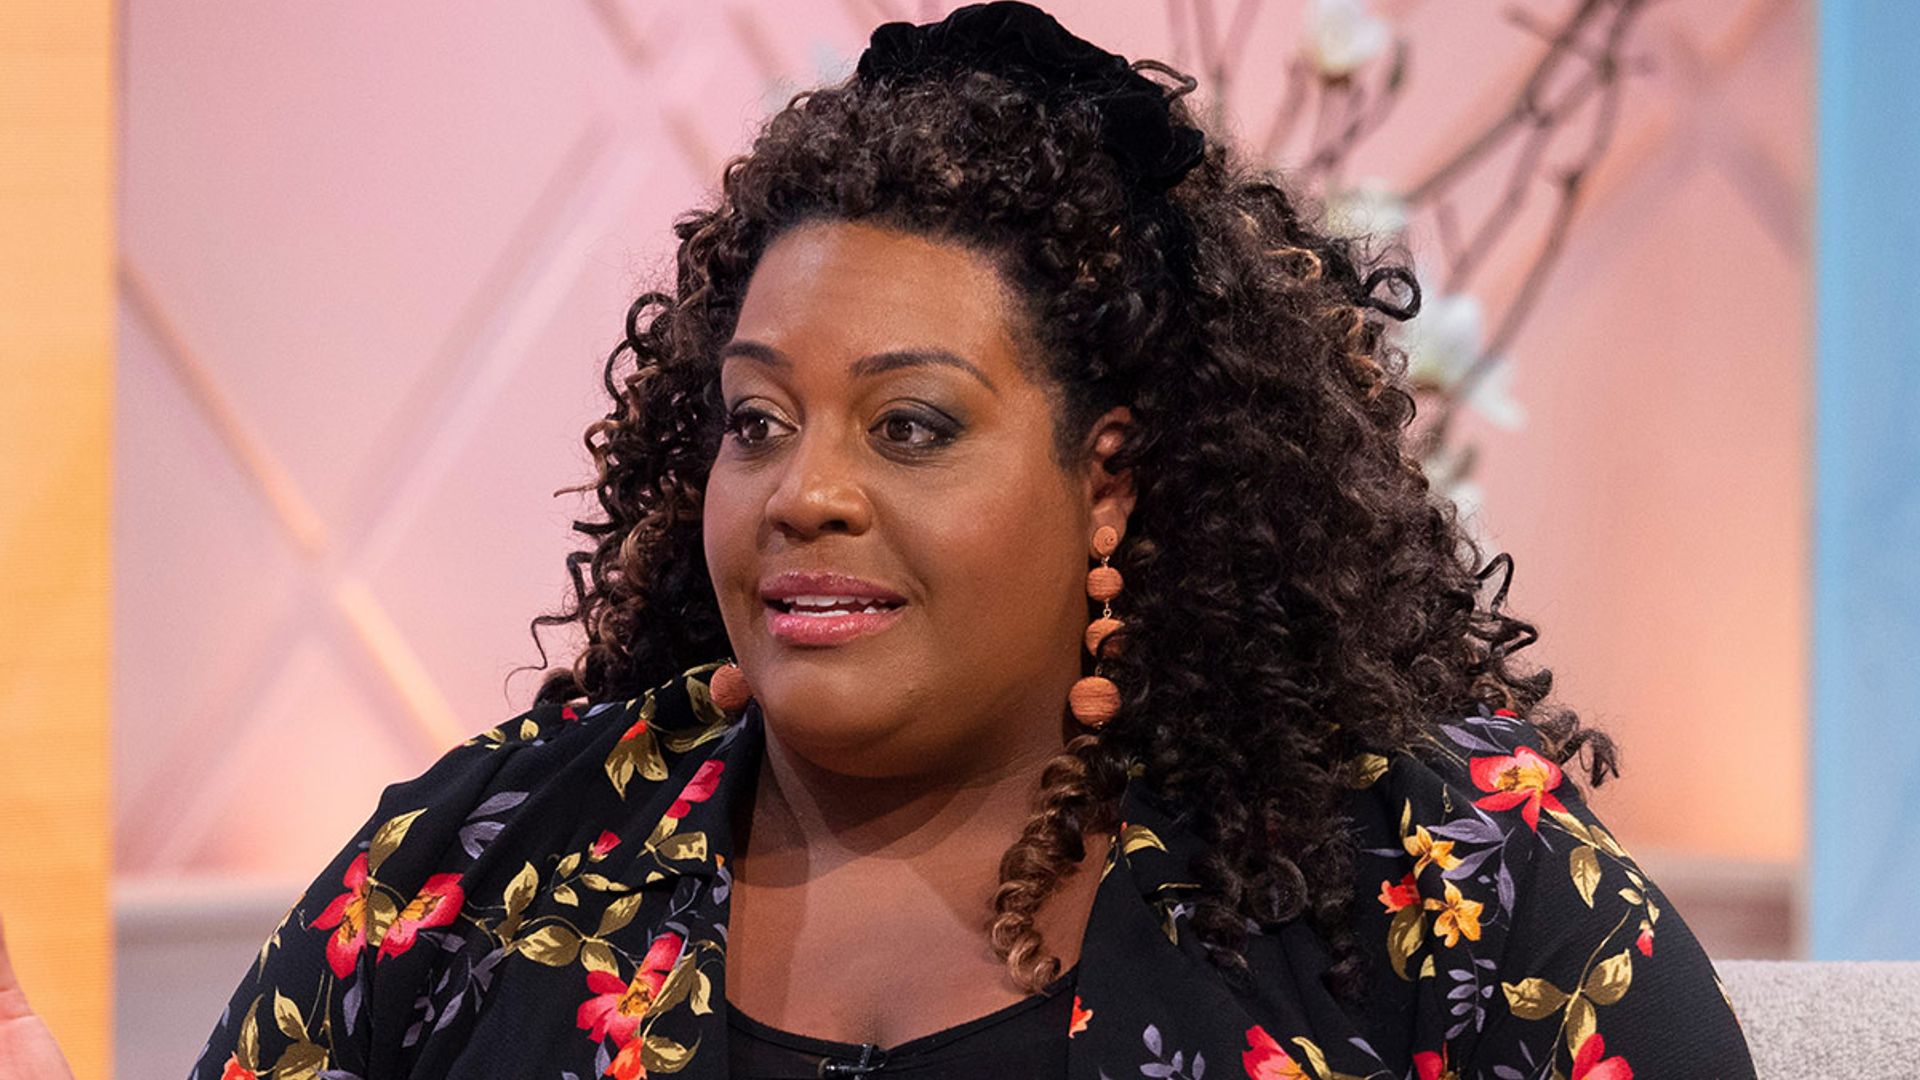 Alison Hammond's incredible Christmas tree with son Aiden pays touching family tribute